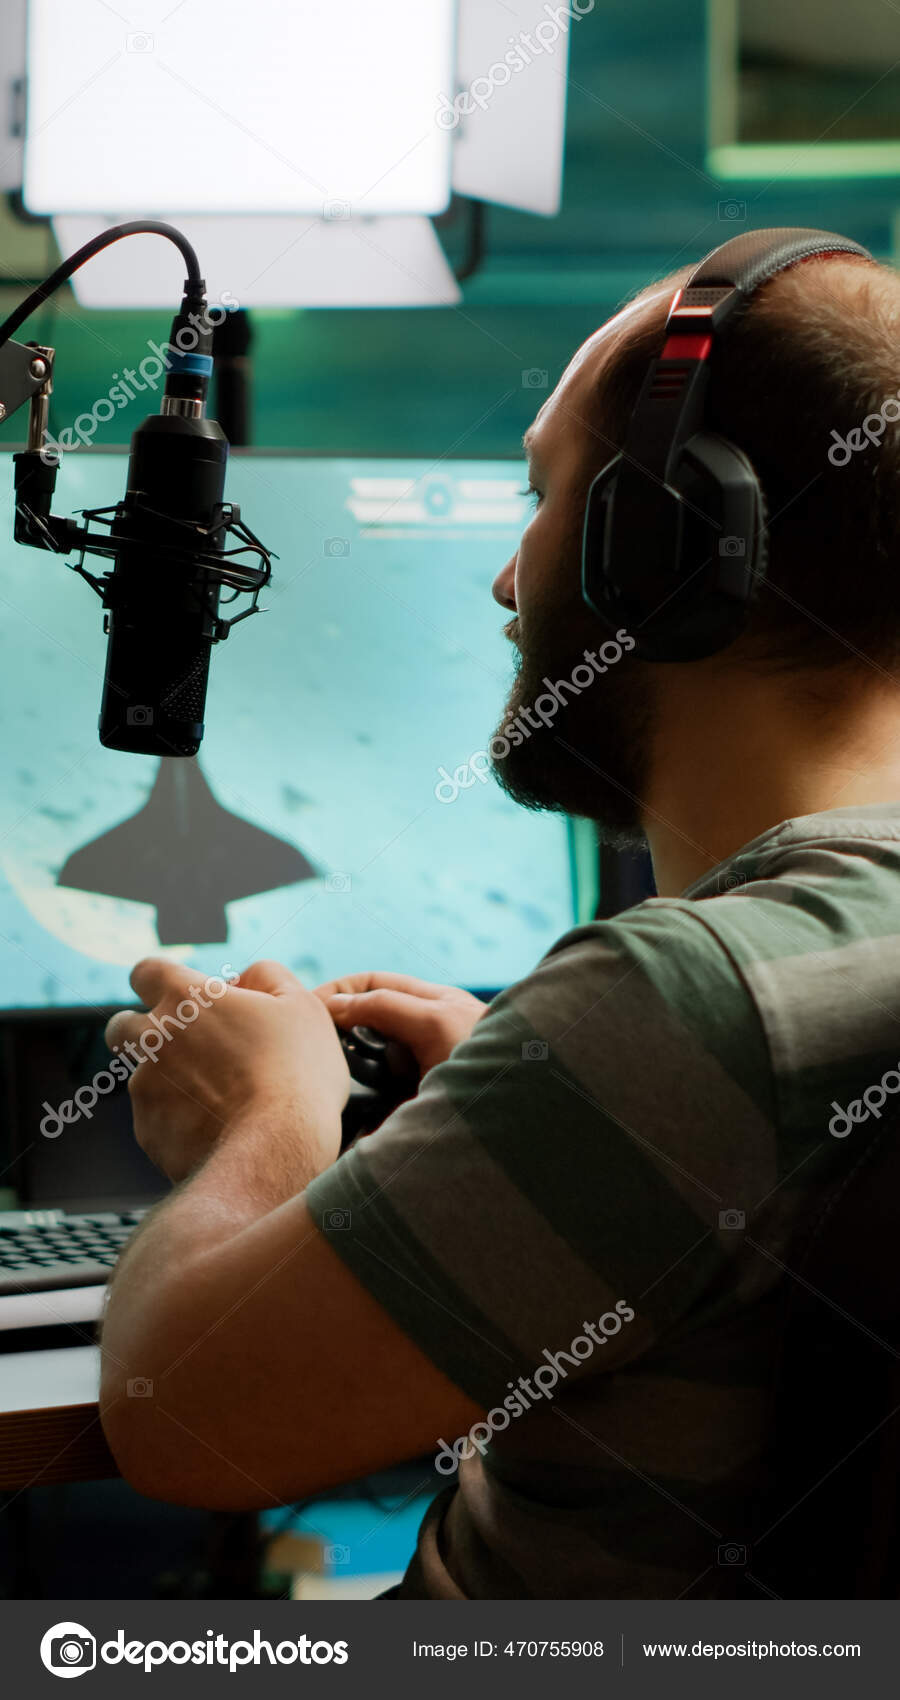 Man streamer playing space shooter video games using controller Stock Photo by ©DragosCondreaW 470755908